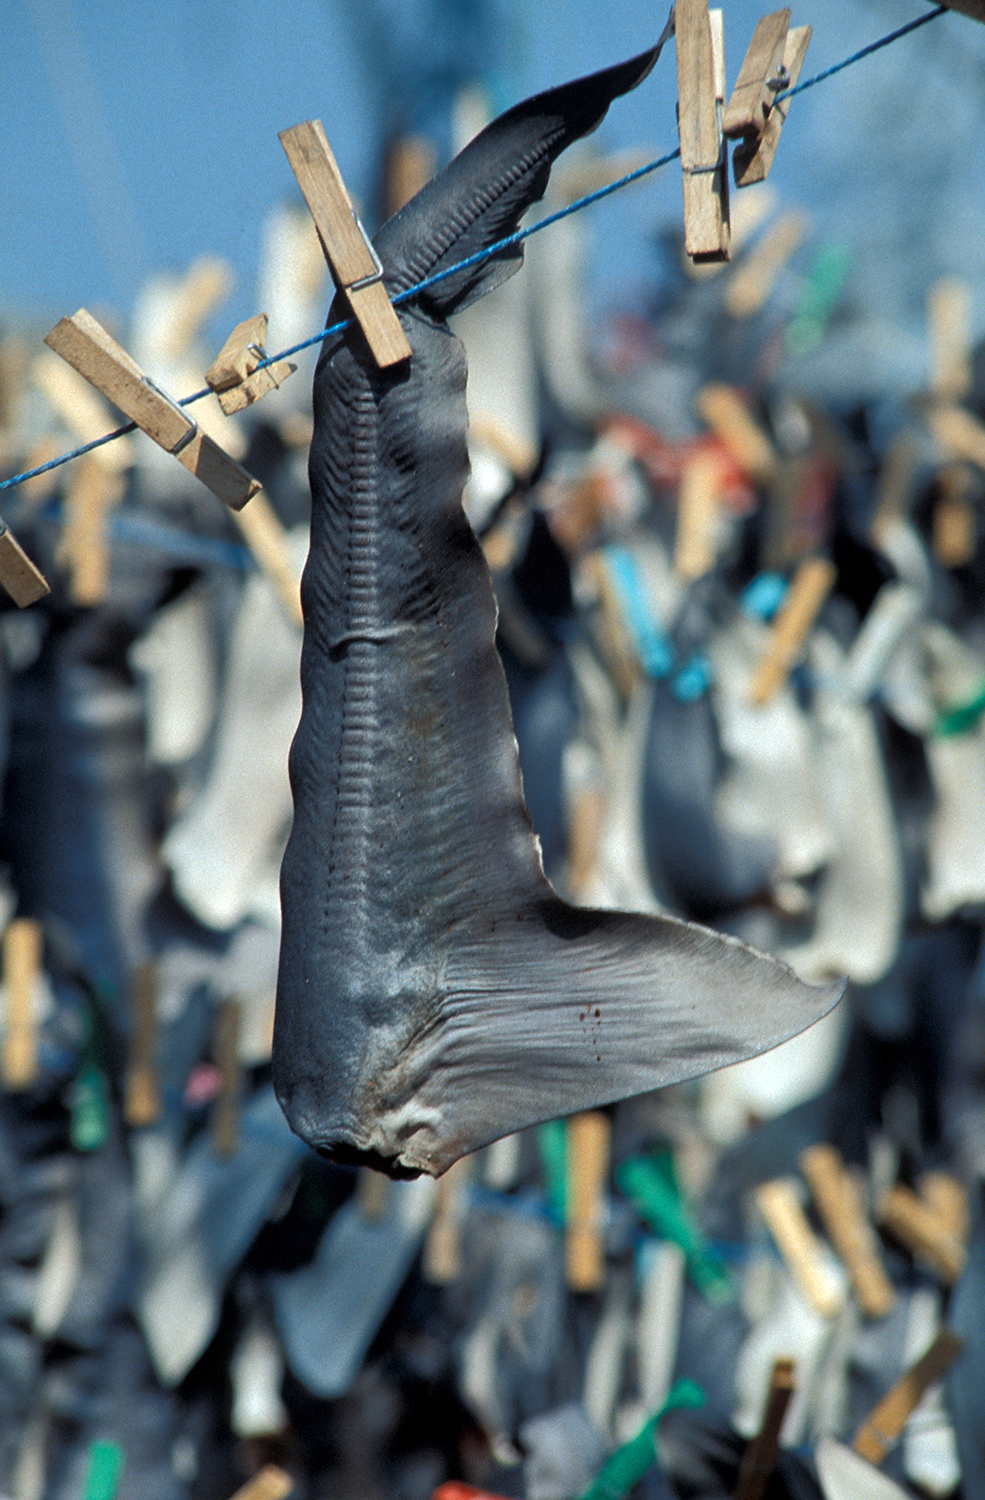 The Push to Stop the Killing of Sharks for Their Fins